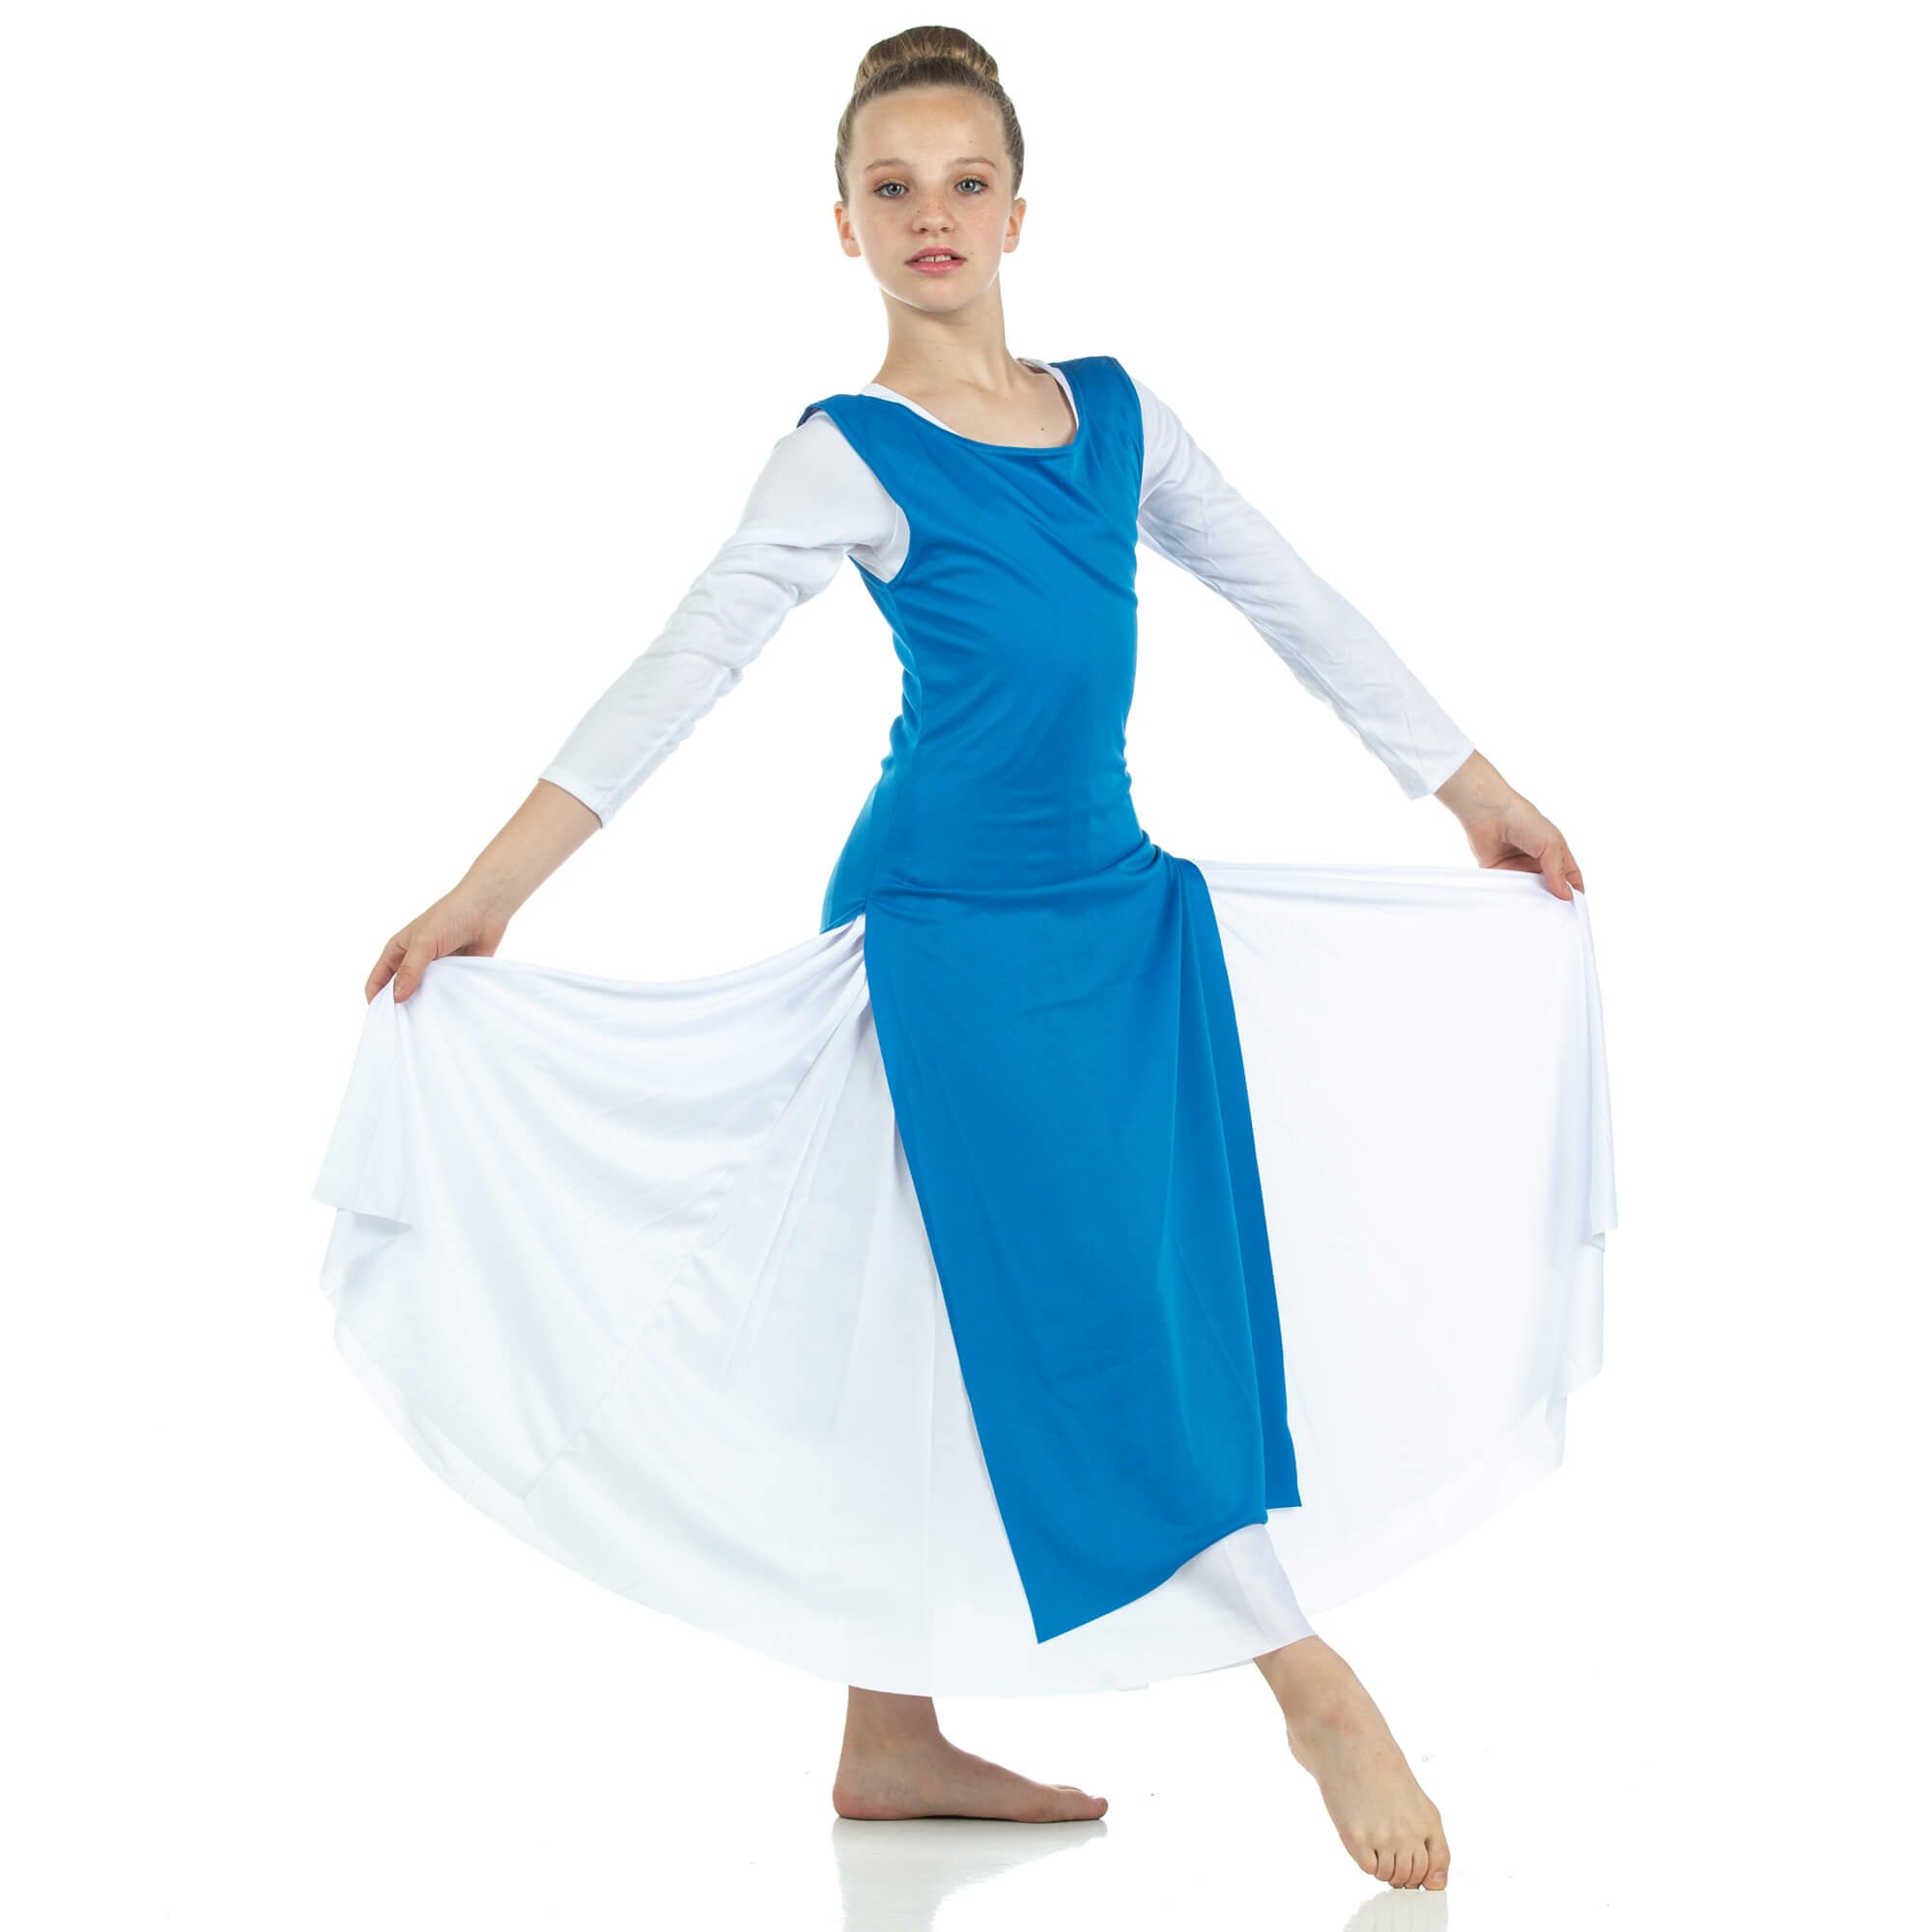 Child Worship Dance Tunic with Side Slits (white dress not included) - Click Image to Close